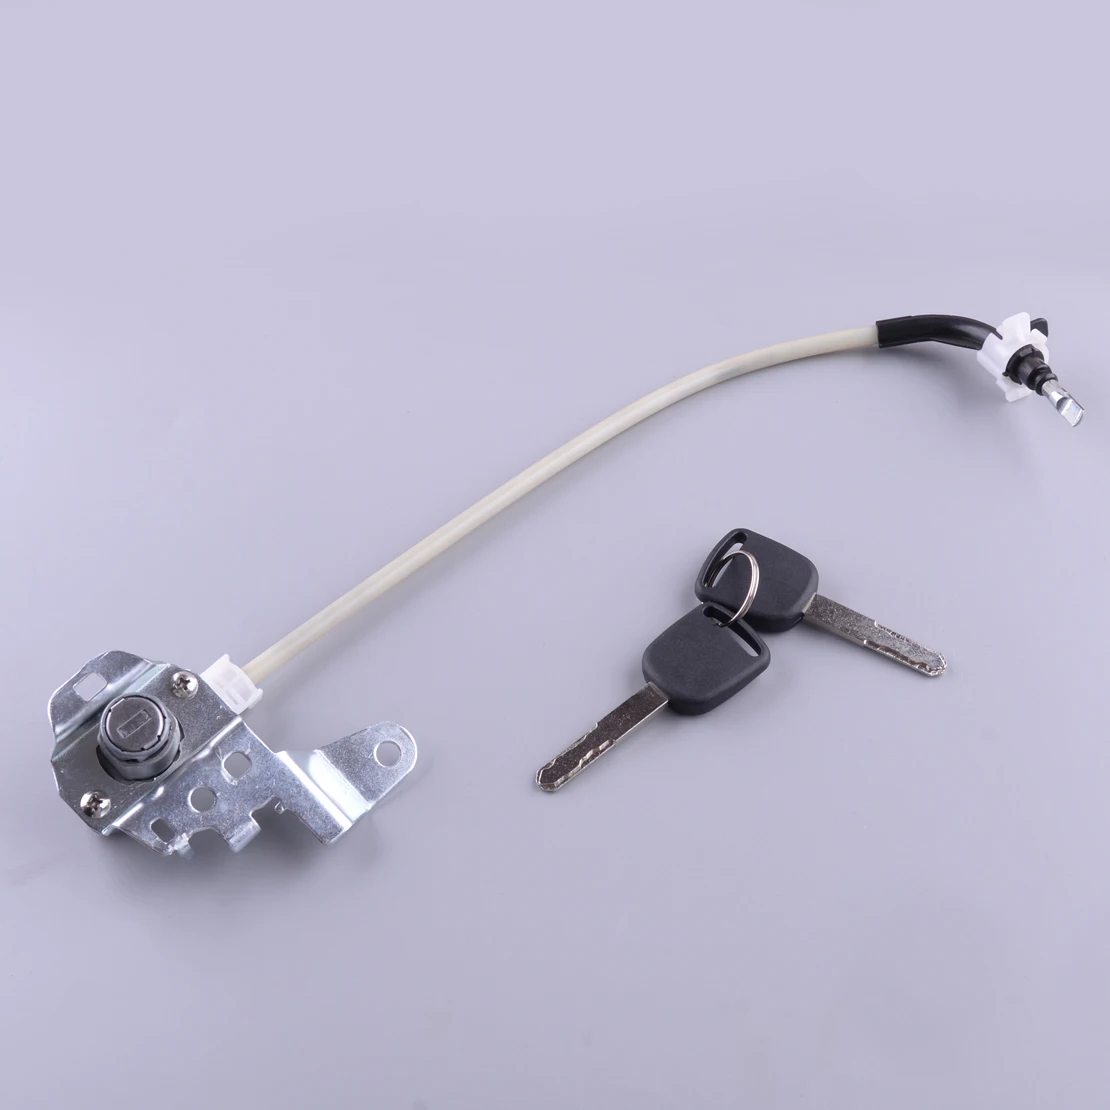 Car Front Left Side Door Lock Cylinder Switch Cable Key 72185-SWA-A01 Fit for Honda CRV 2007 2008 2009 2010 2011